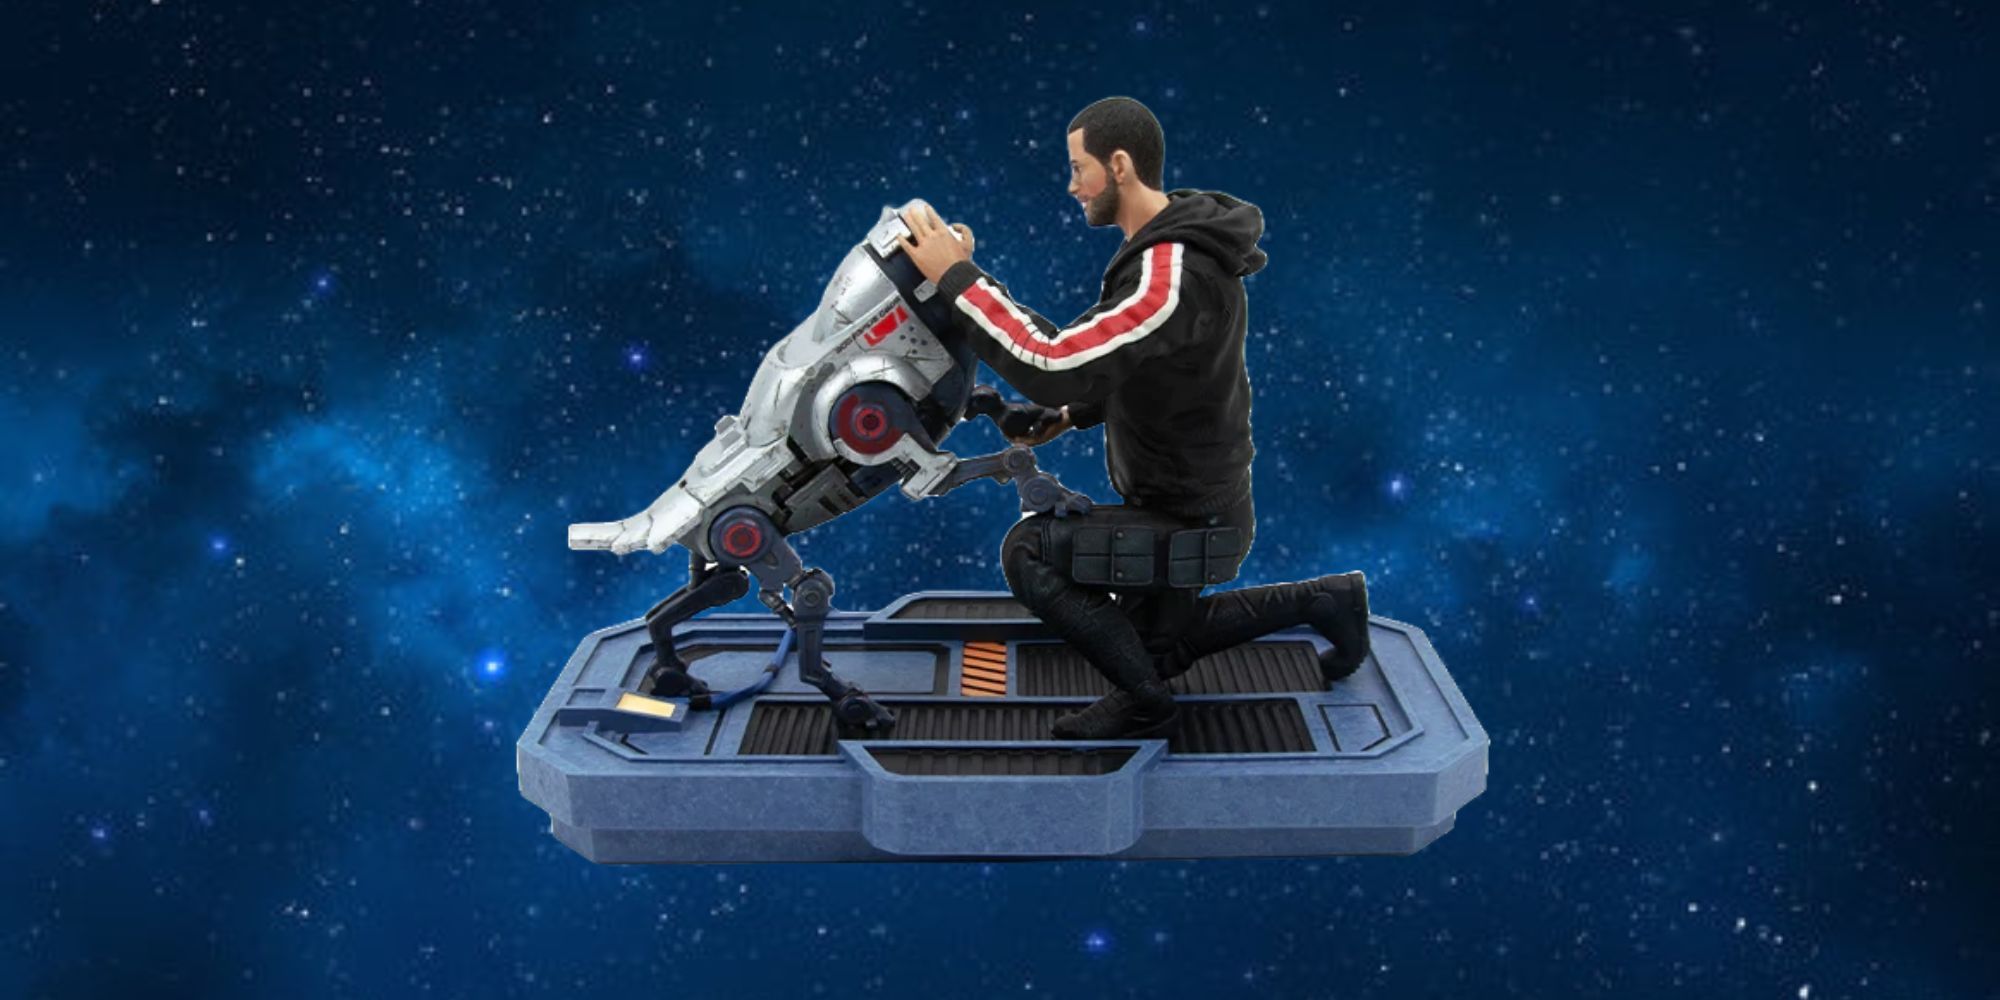 Mass Effect's Limited Edition Shepard And KEI-9 Statue Now Available For Collectors